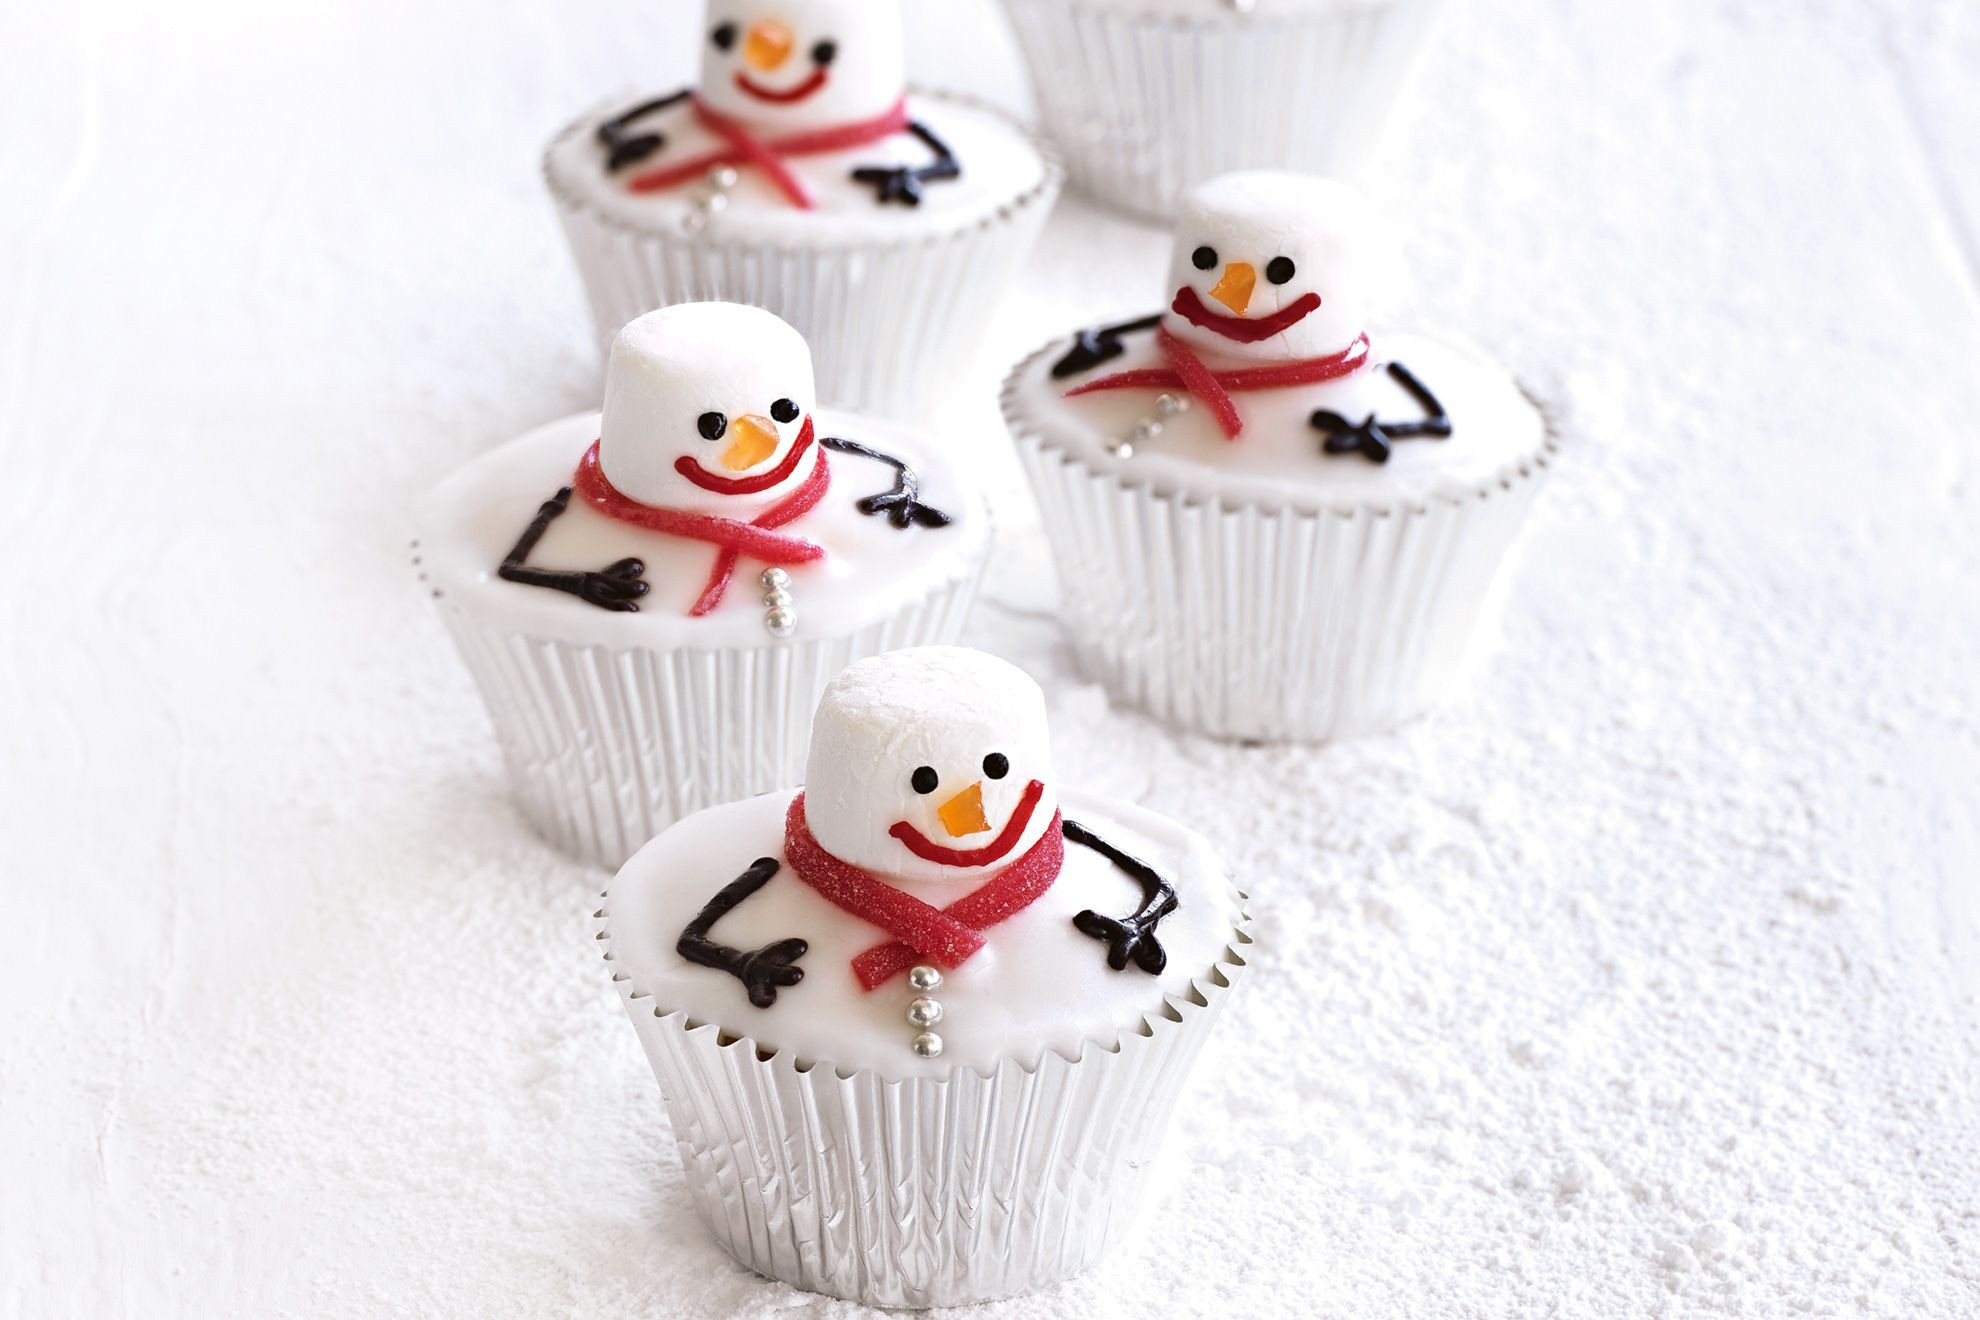 Melted snowman cupcakes